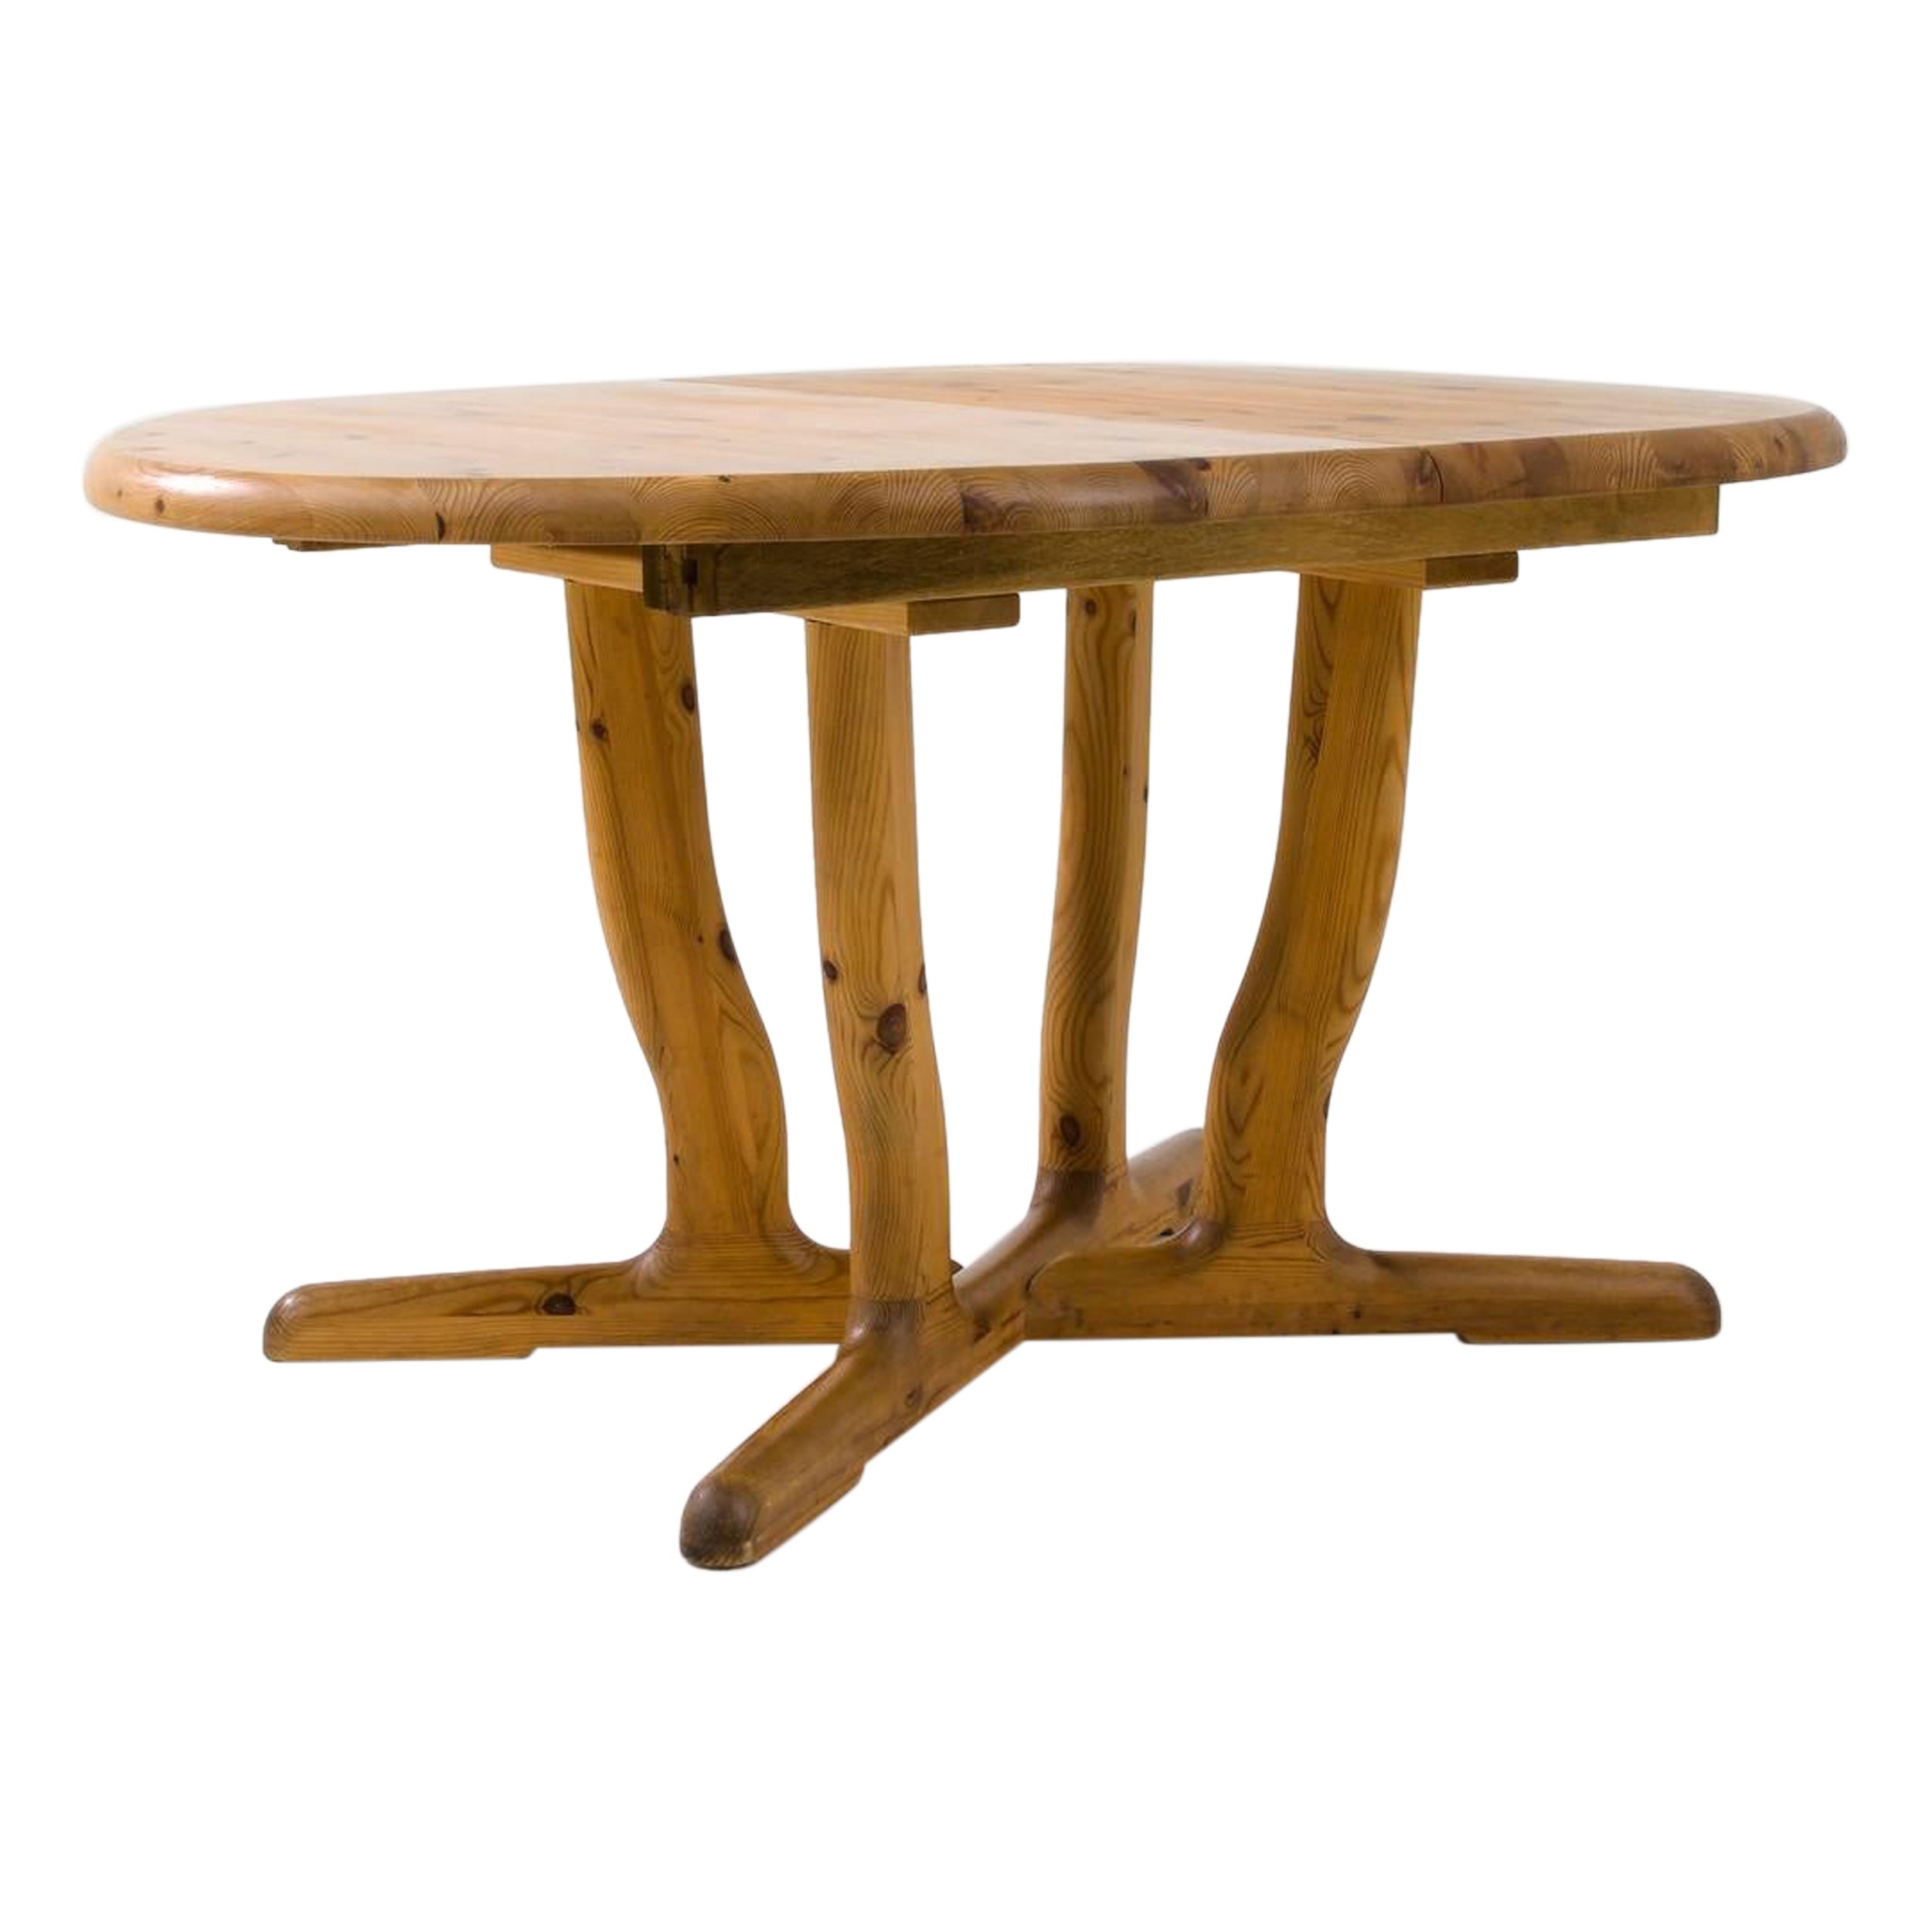 20th Century Scandinavian Wooden Extendable Dining Table For Sale